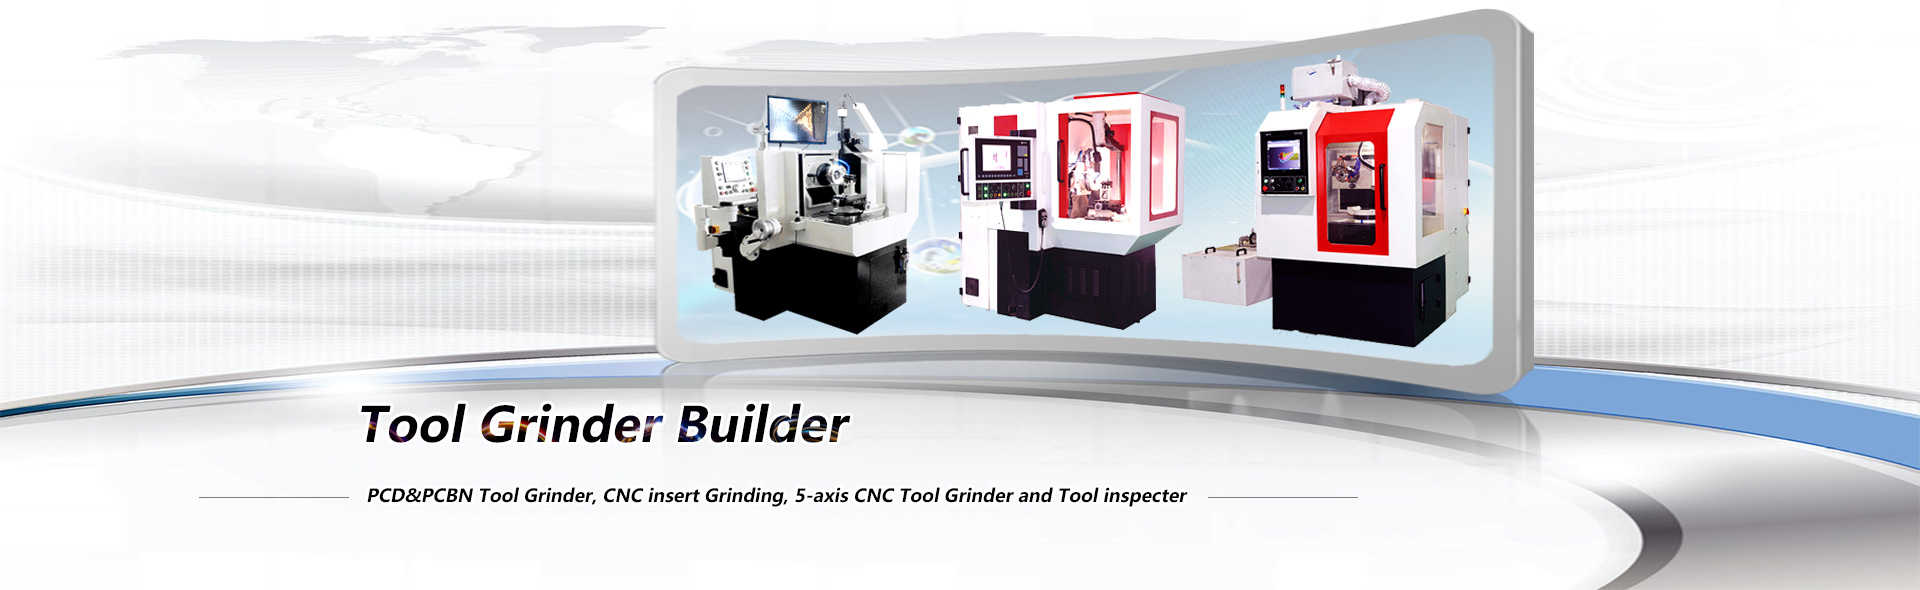 ToolBox - Swiss ToolBox Software Is Adapted For Five-axis Tool Grinders